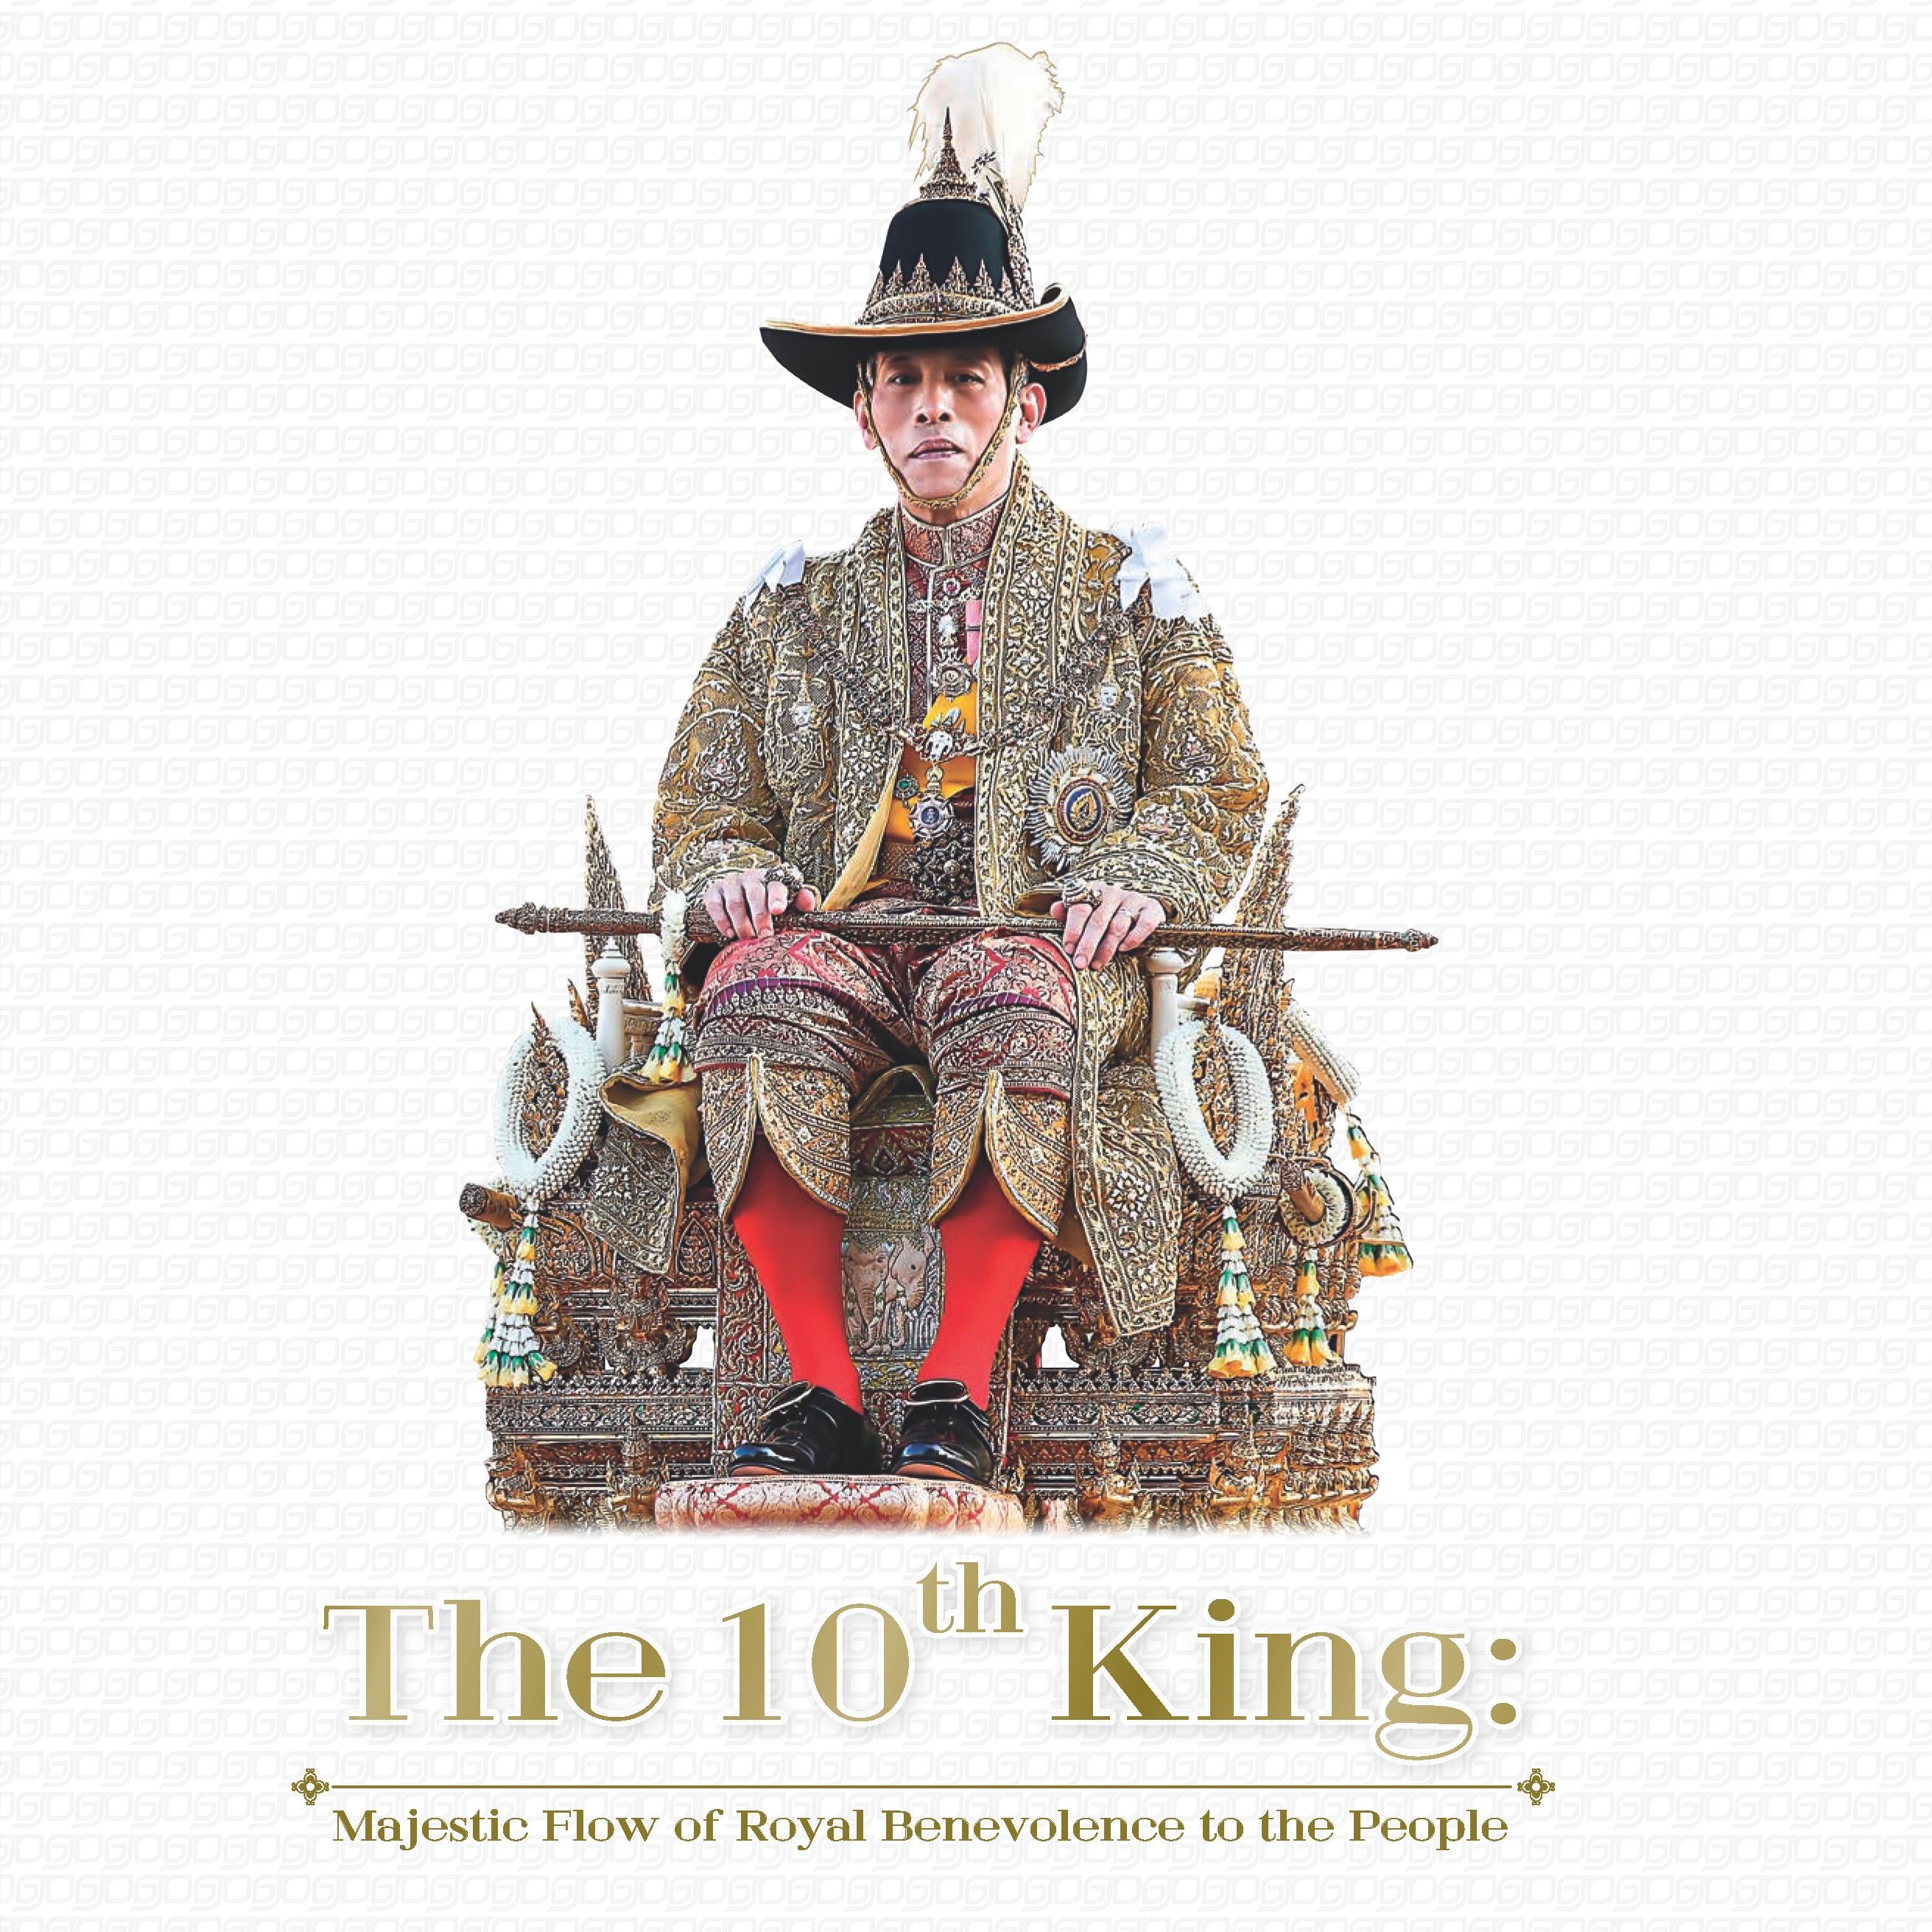 The 10th King